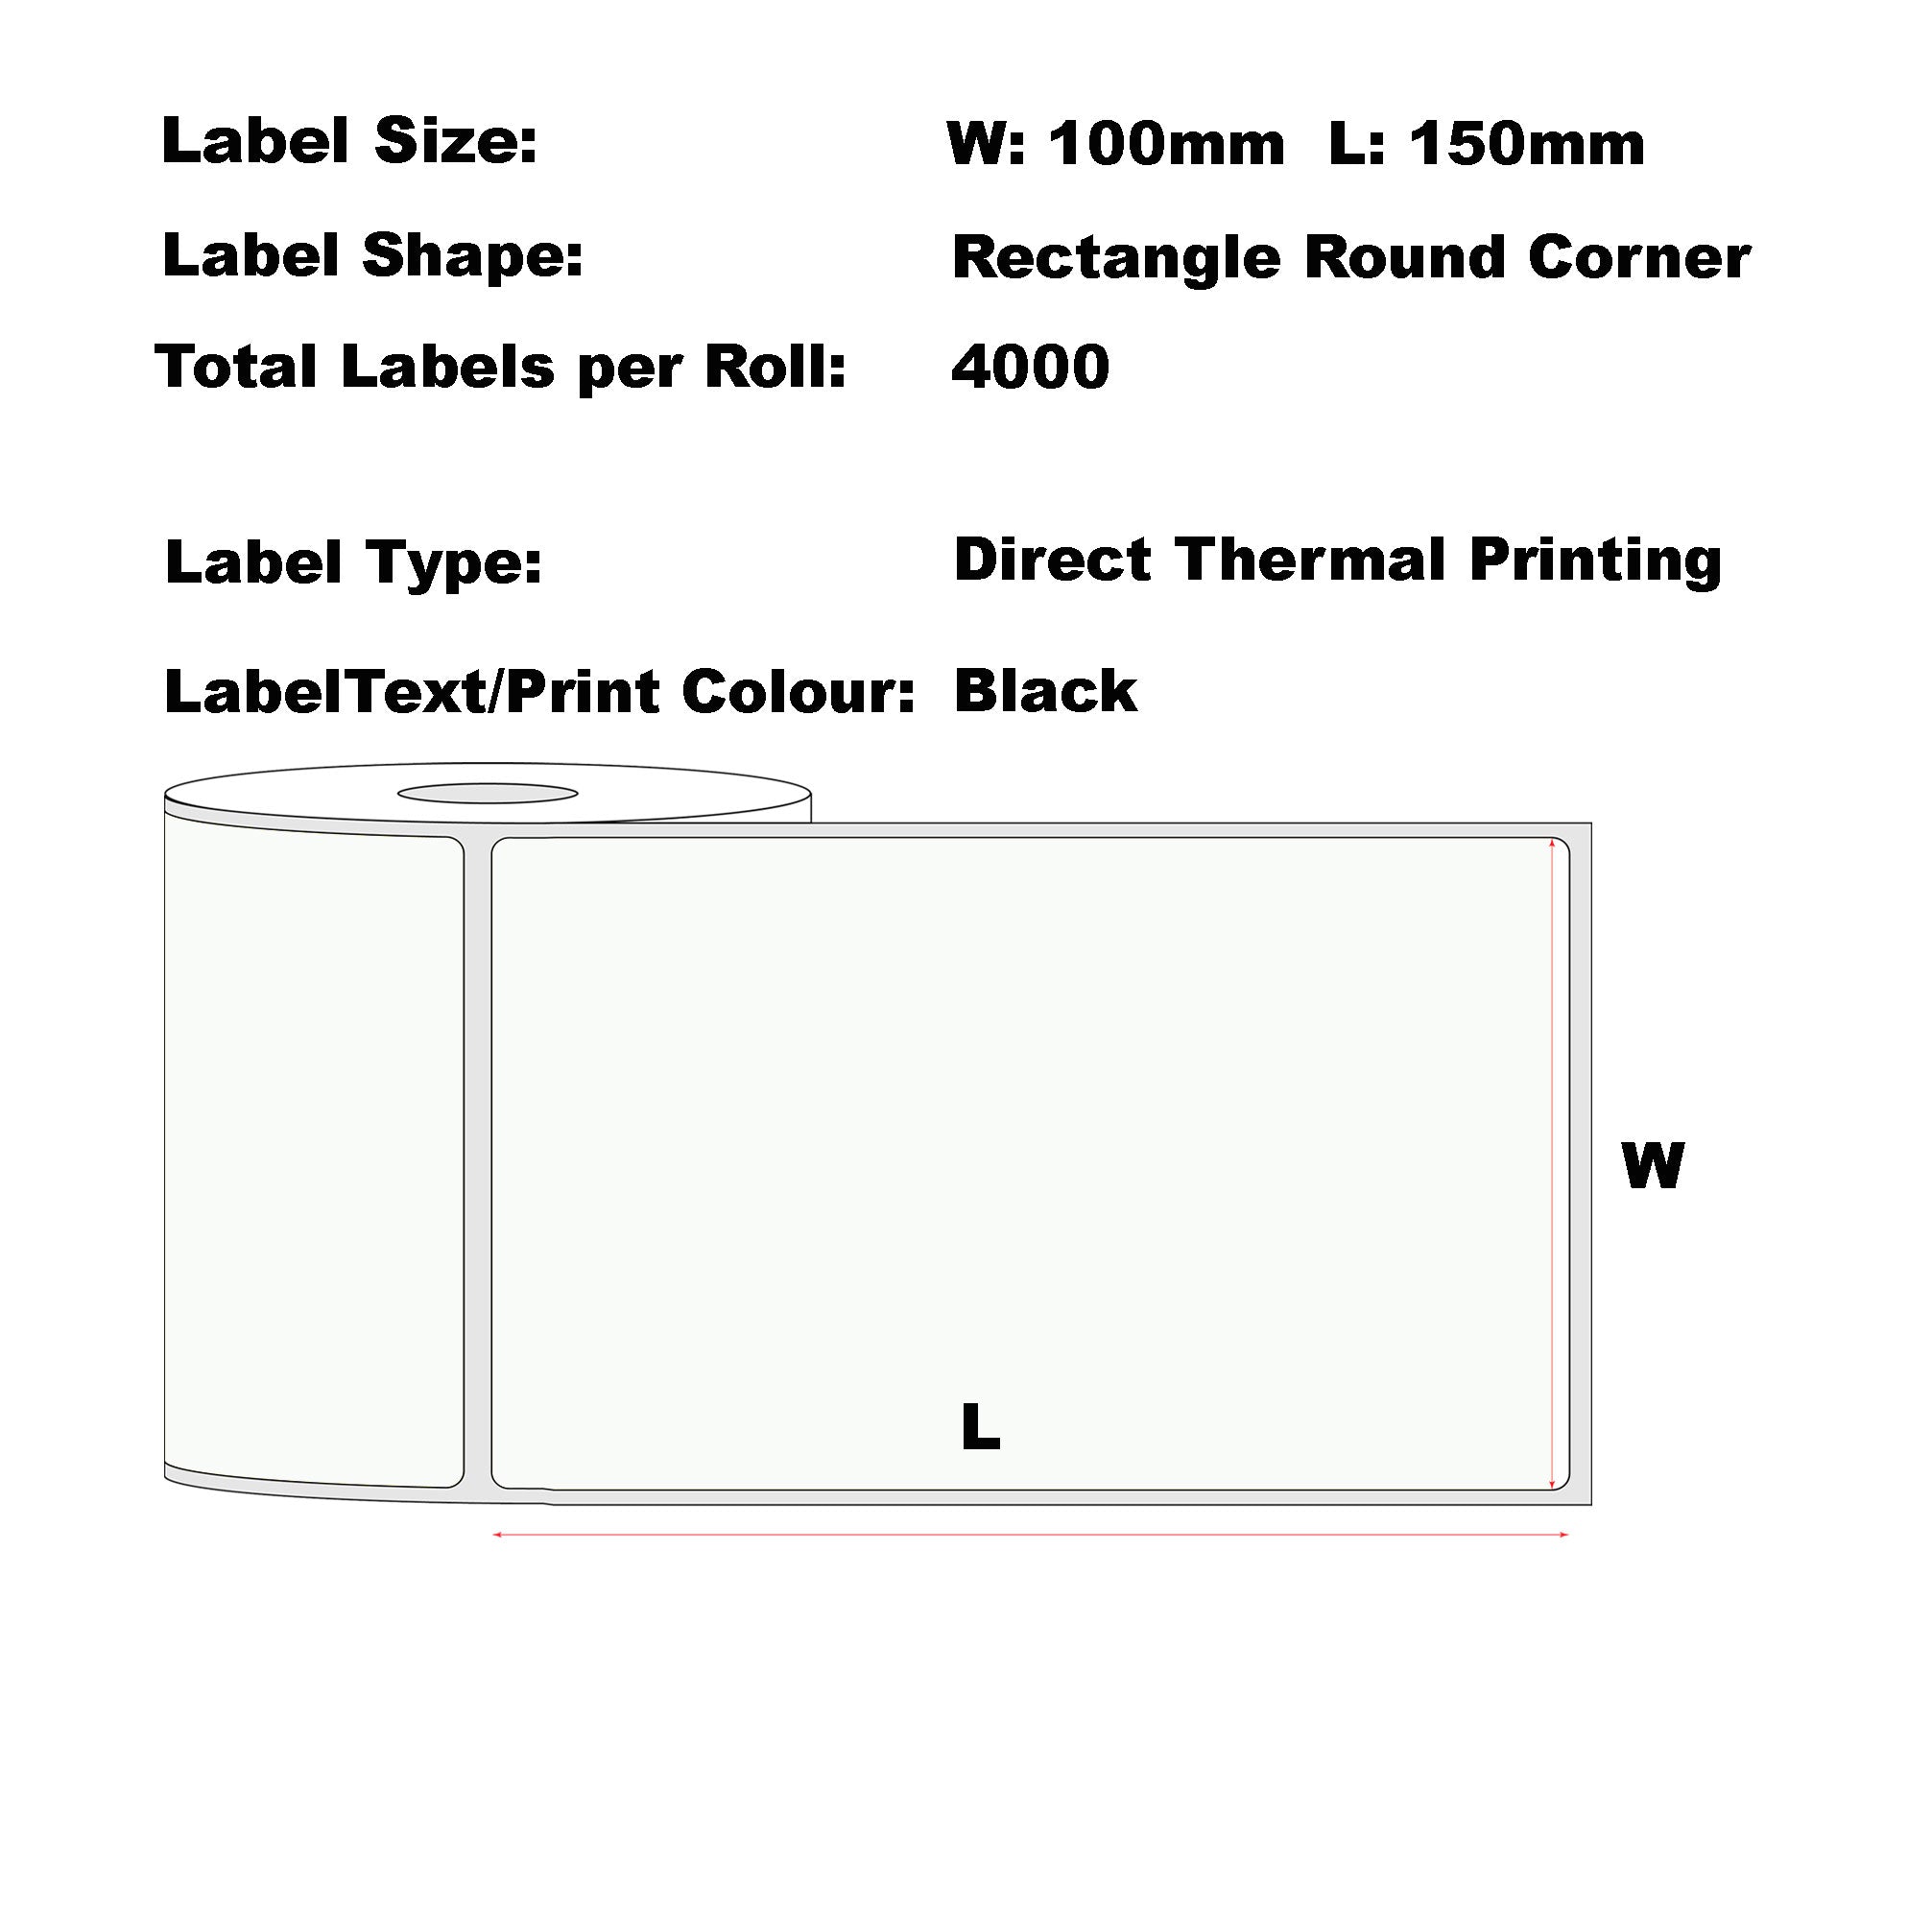 Fanfold 100mm x 150mm (4"x6") Direct Thermal Permanent Label, Perforated,4000 Labels Per Carton, 2 Labels/Fold-4 Cartons